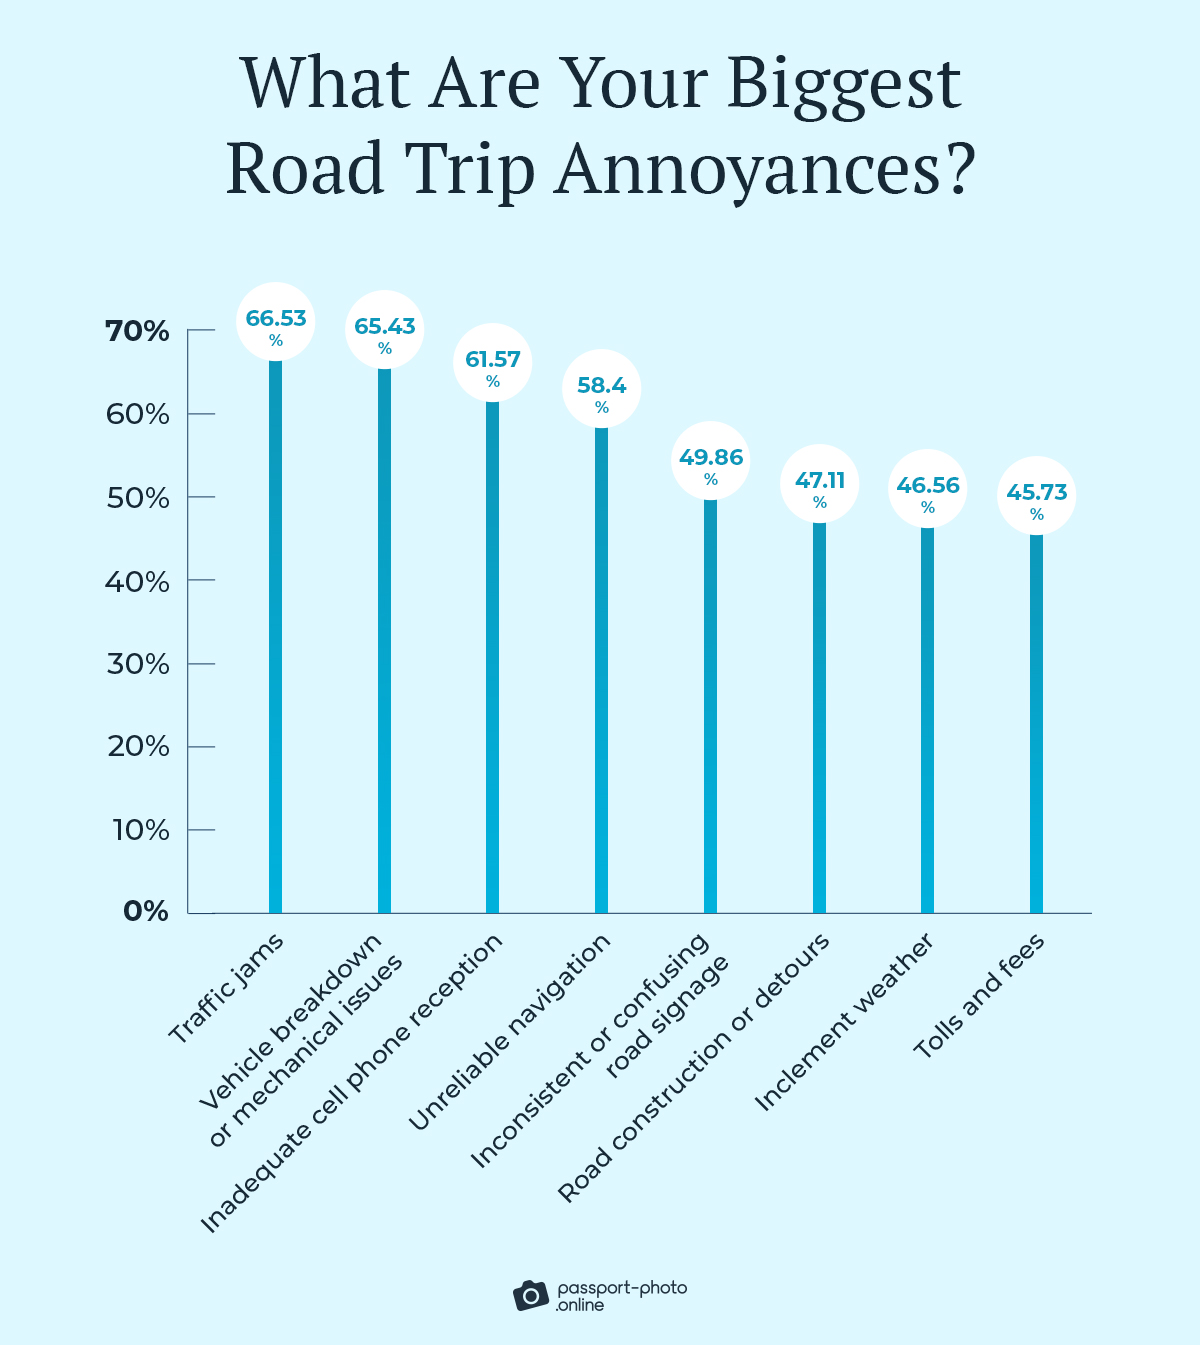 traffic jams (66.53%) is the biggest road trip annoyance in the “travel disruptions” category